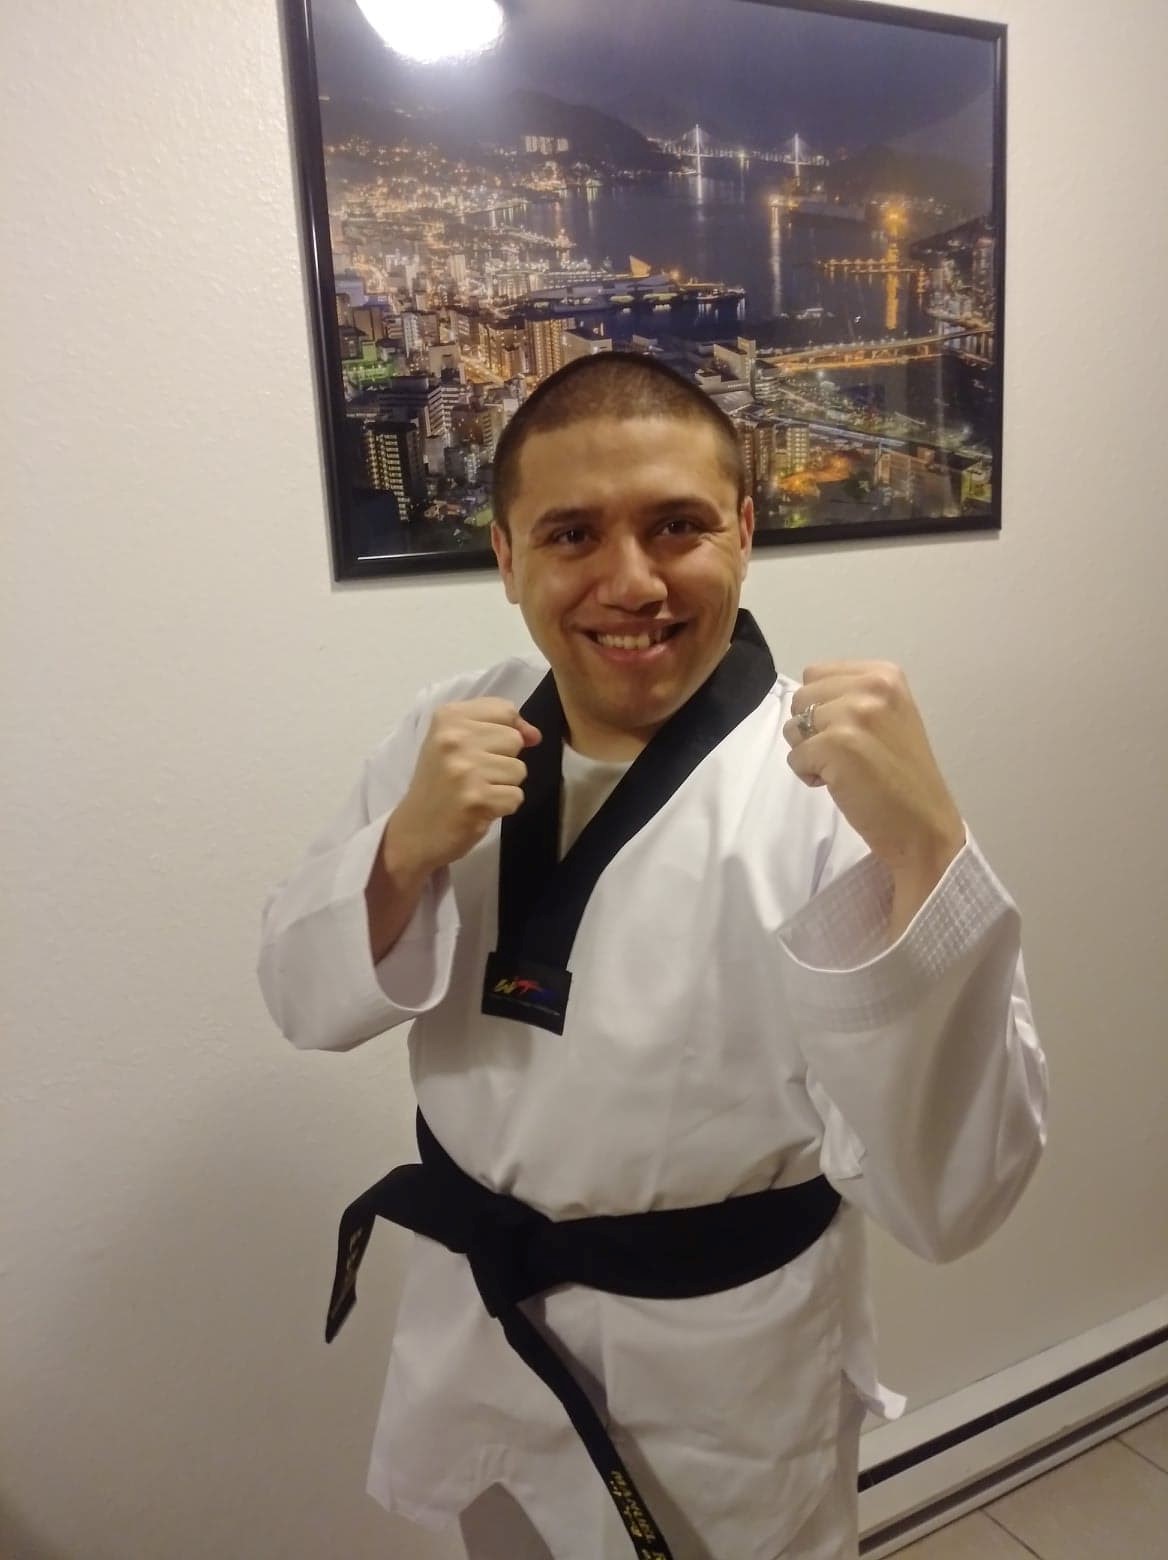 A picture of Manuel, who had sudden hearing loss, with his black belt